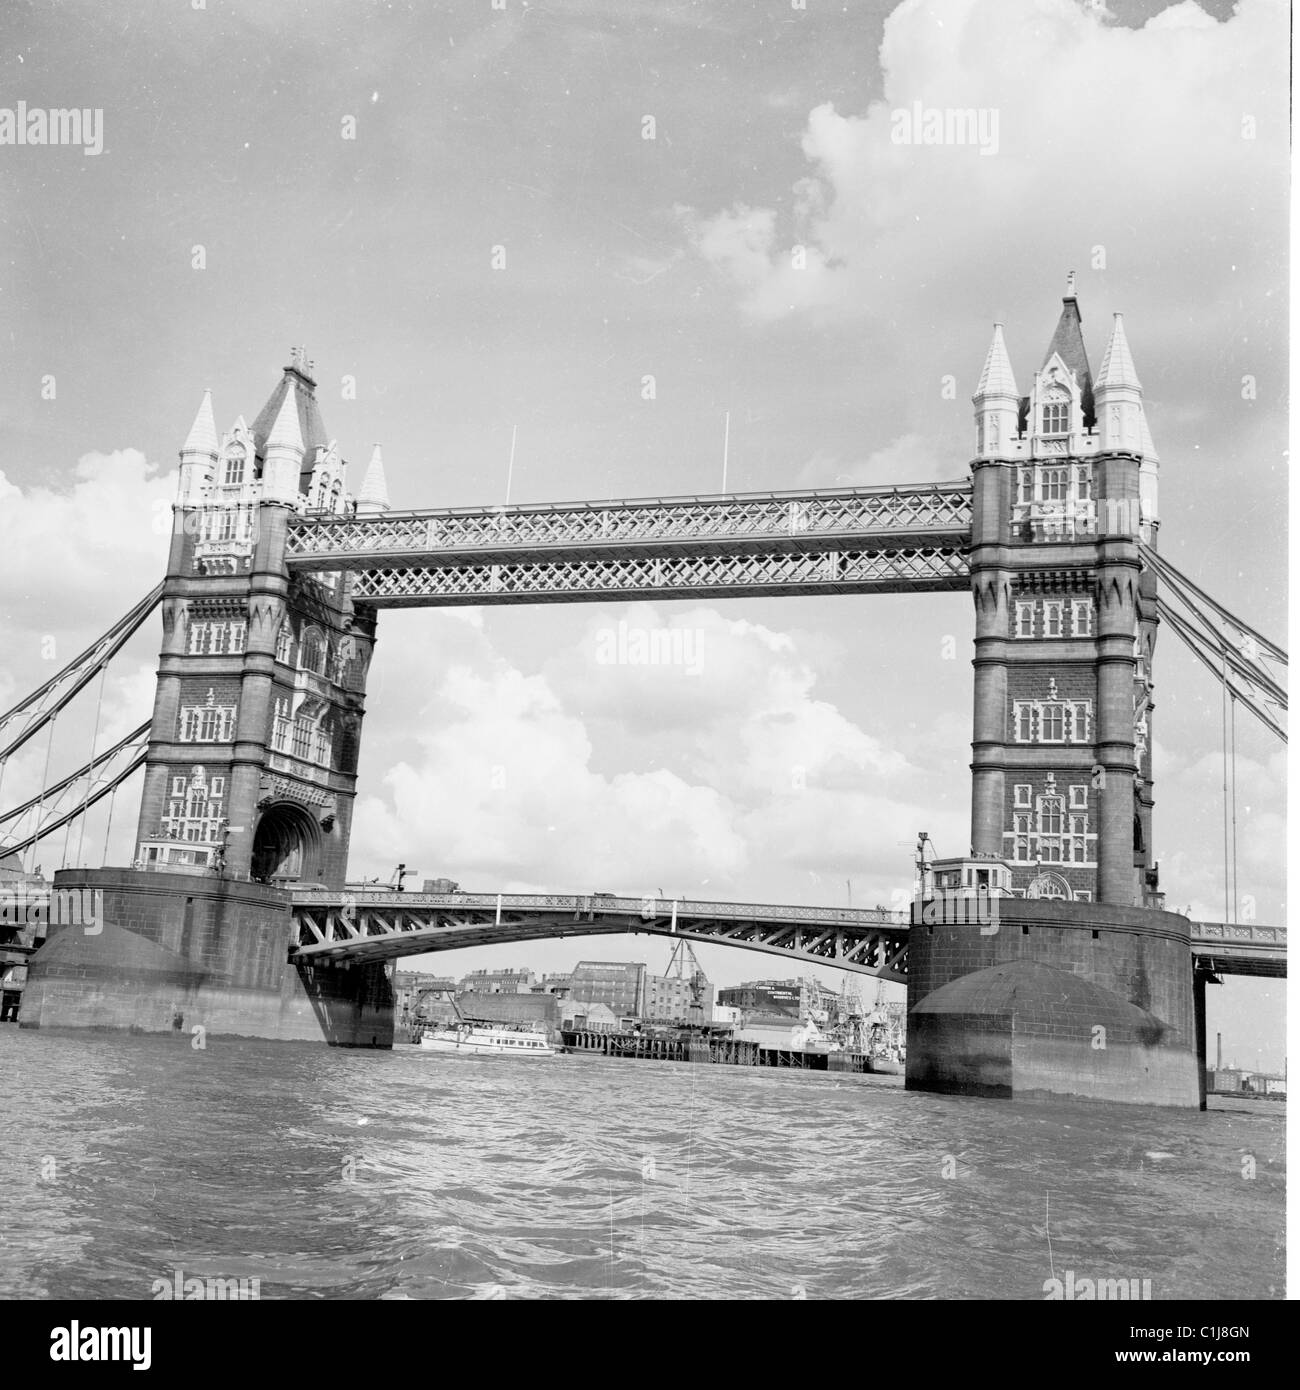 1950s, Tower Bridge, River Thames, a bascule & suspension bridge built in victorian gothic style to match the nearby Tower of London, opened in 1894. Stock Photo